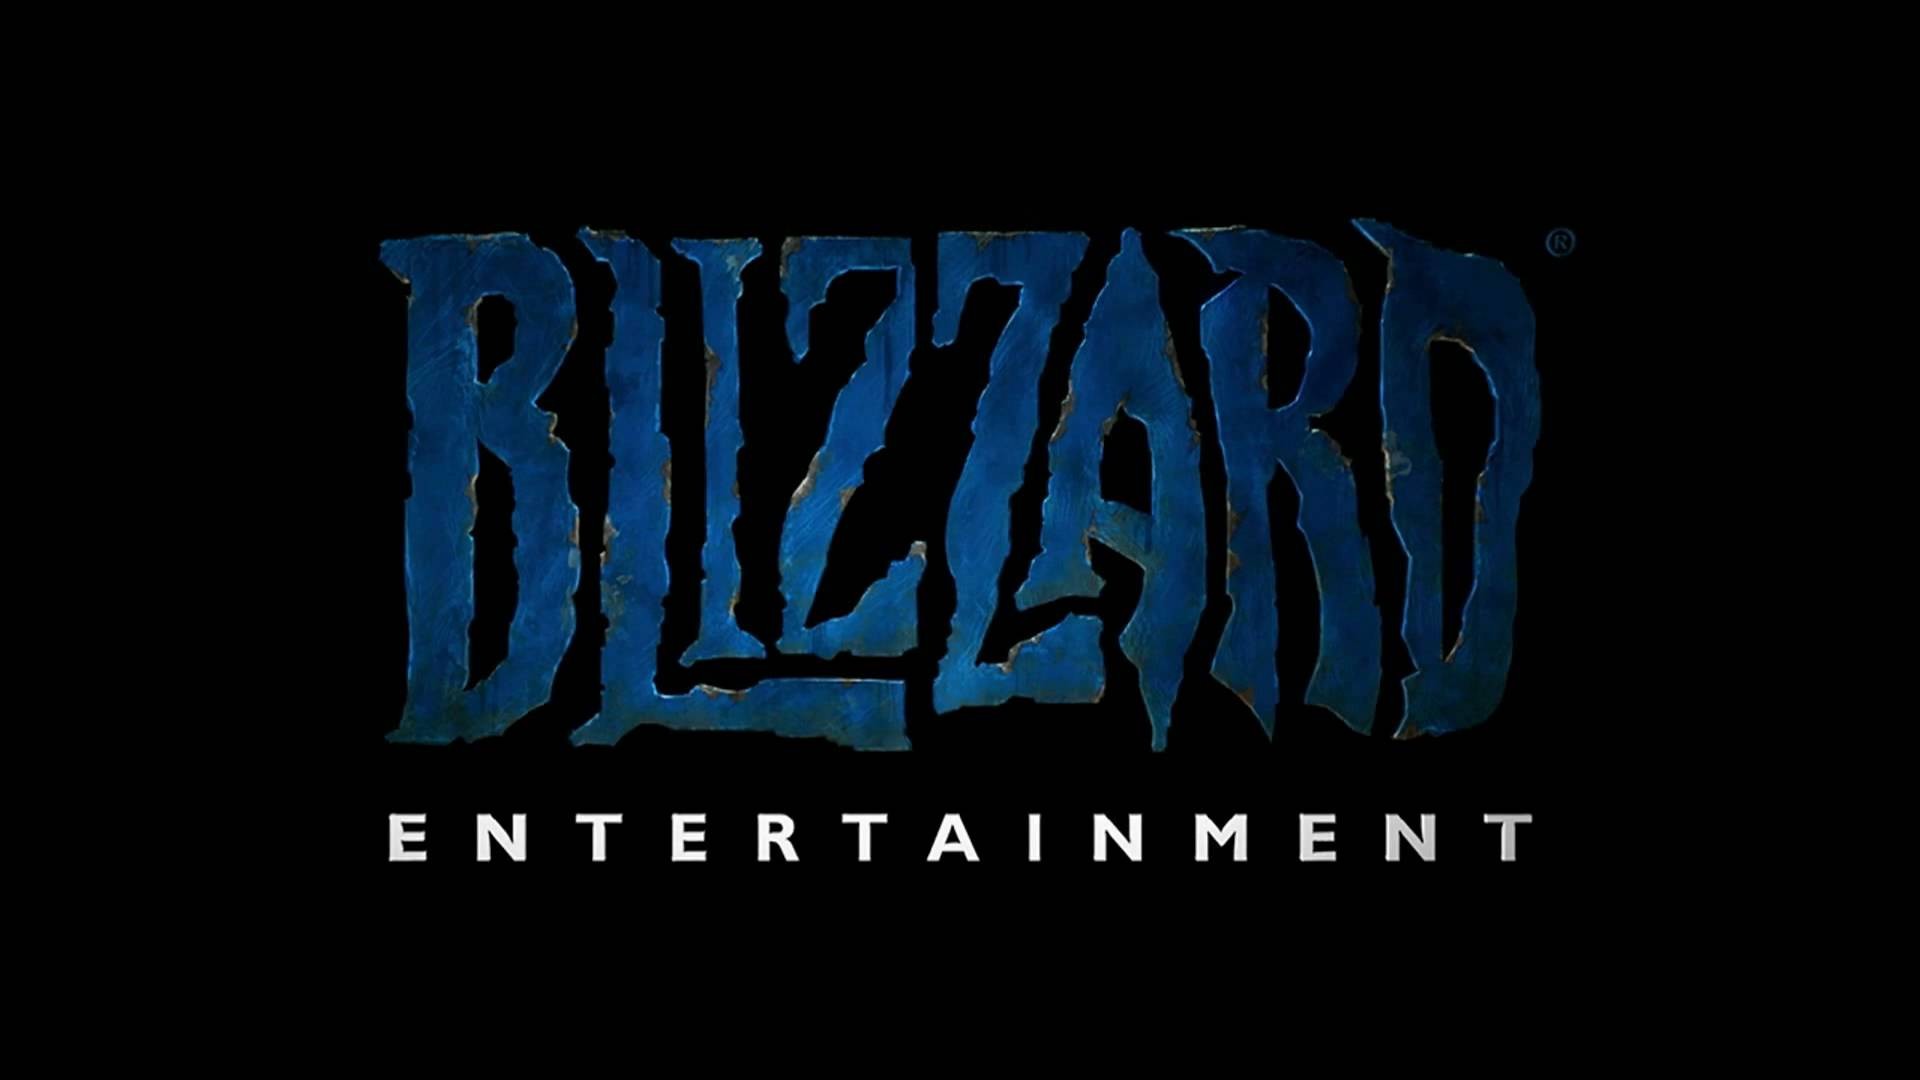 Blizzard Entertainment HD Wallpaper And Background